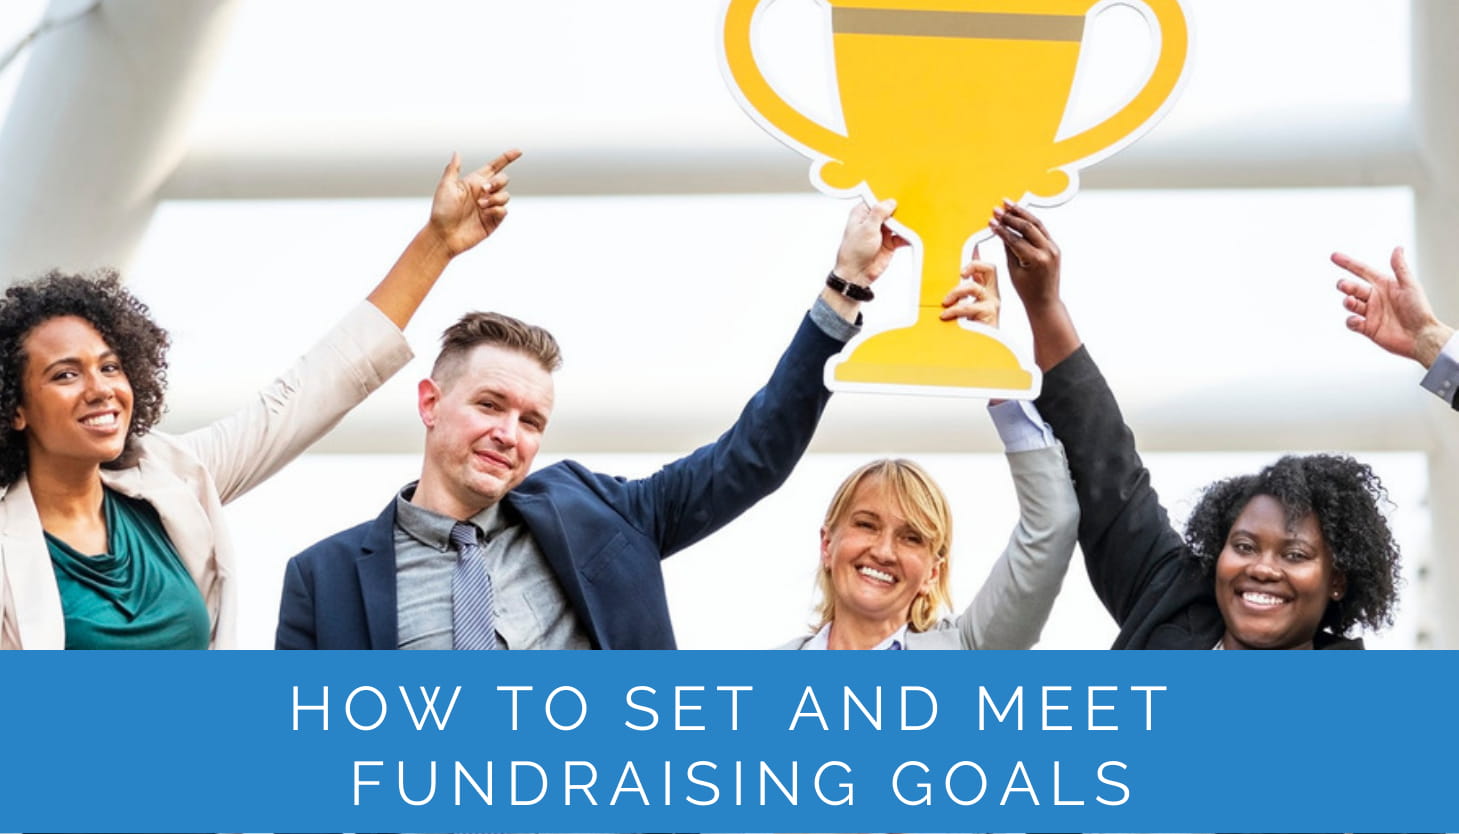 How to Set and Meet Fundraising Goals the Smart Way (+13 Tips)